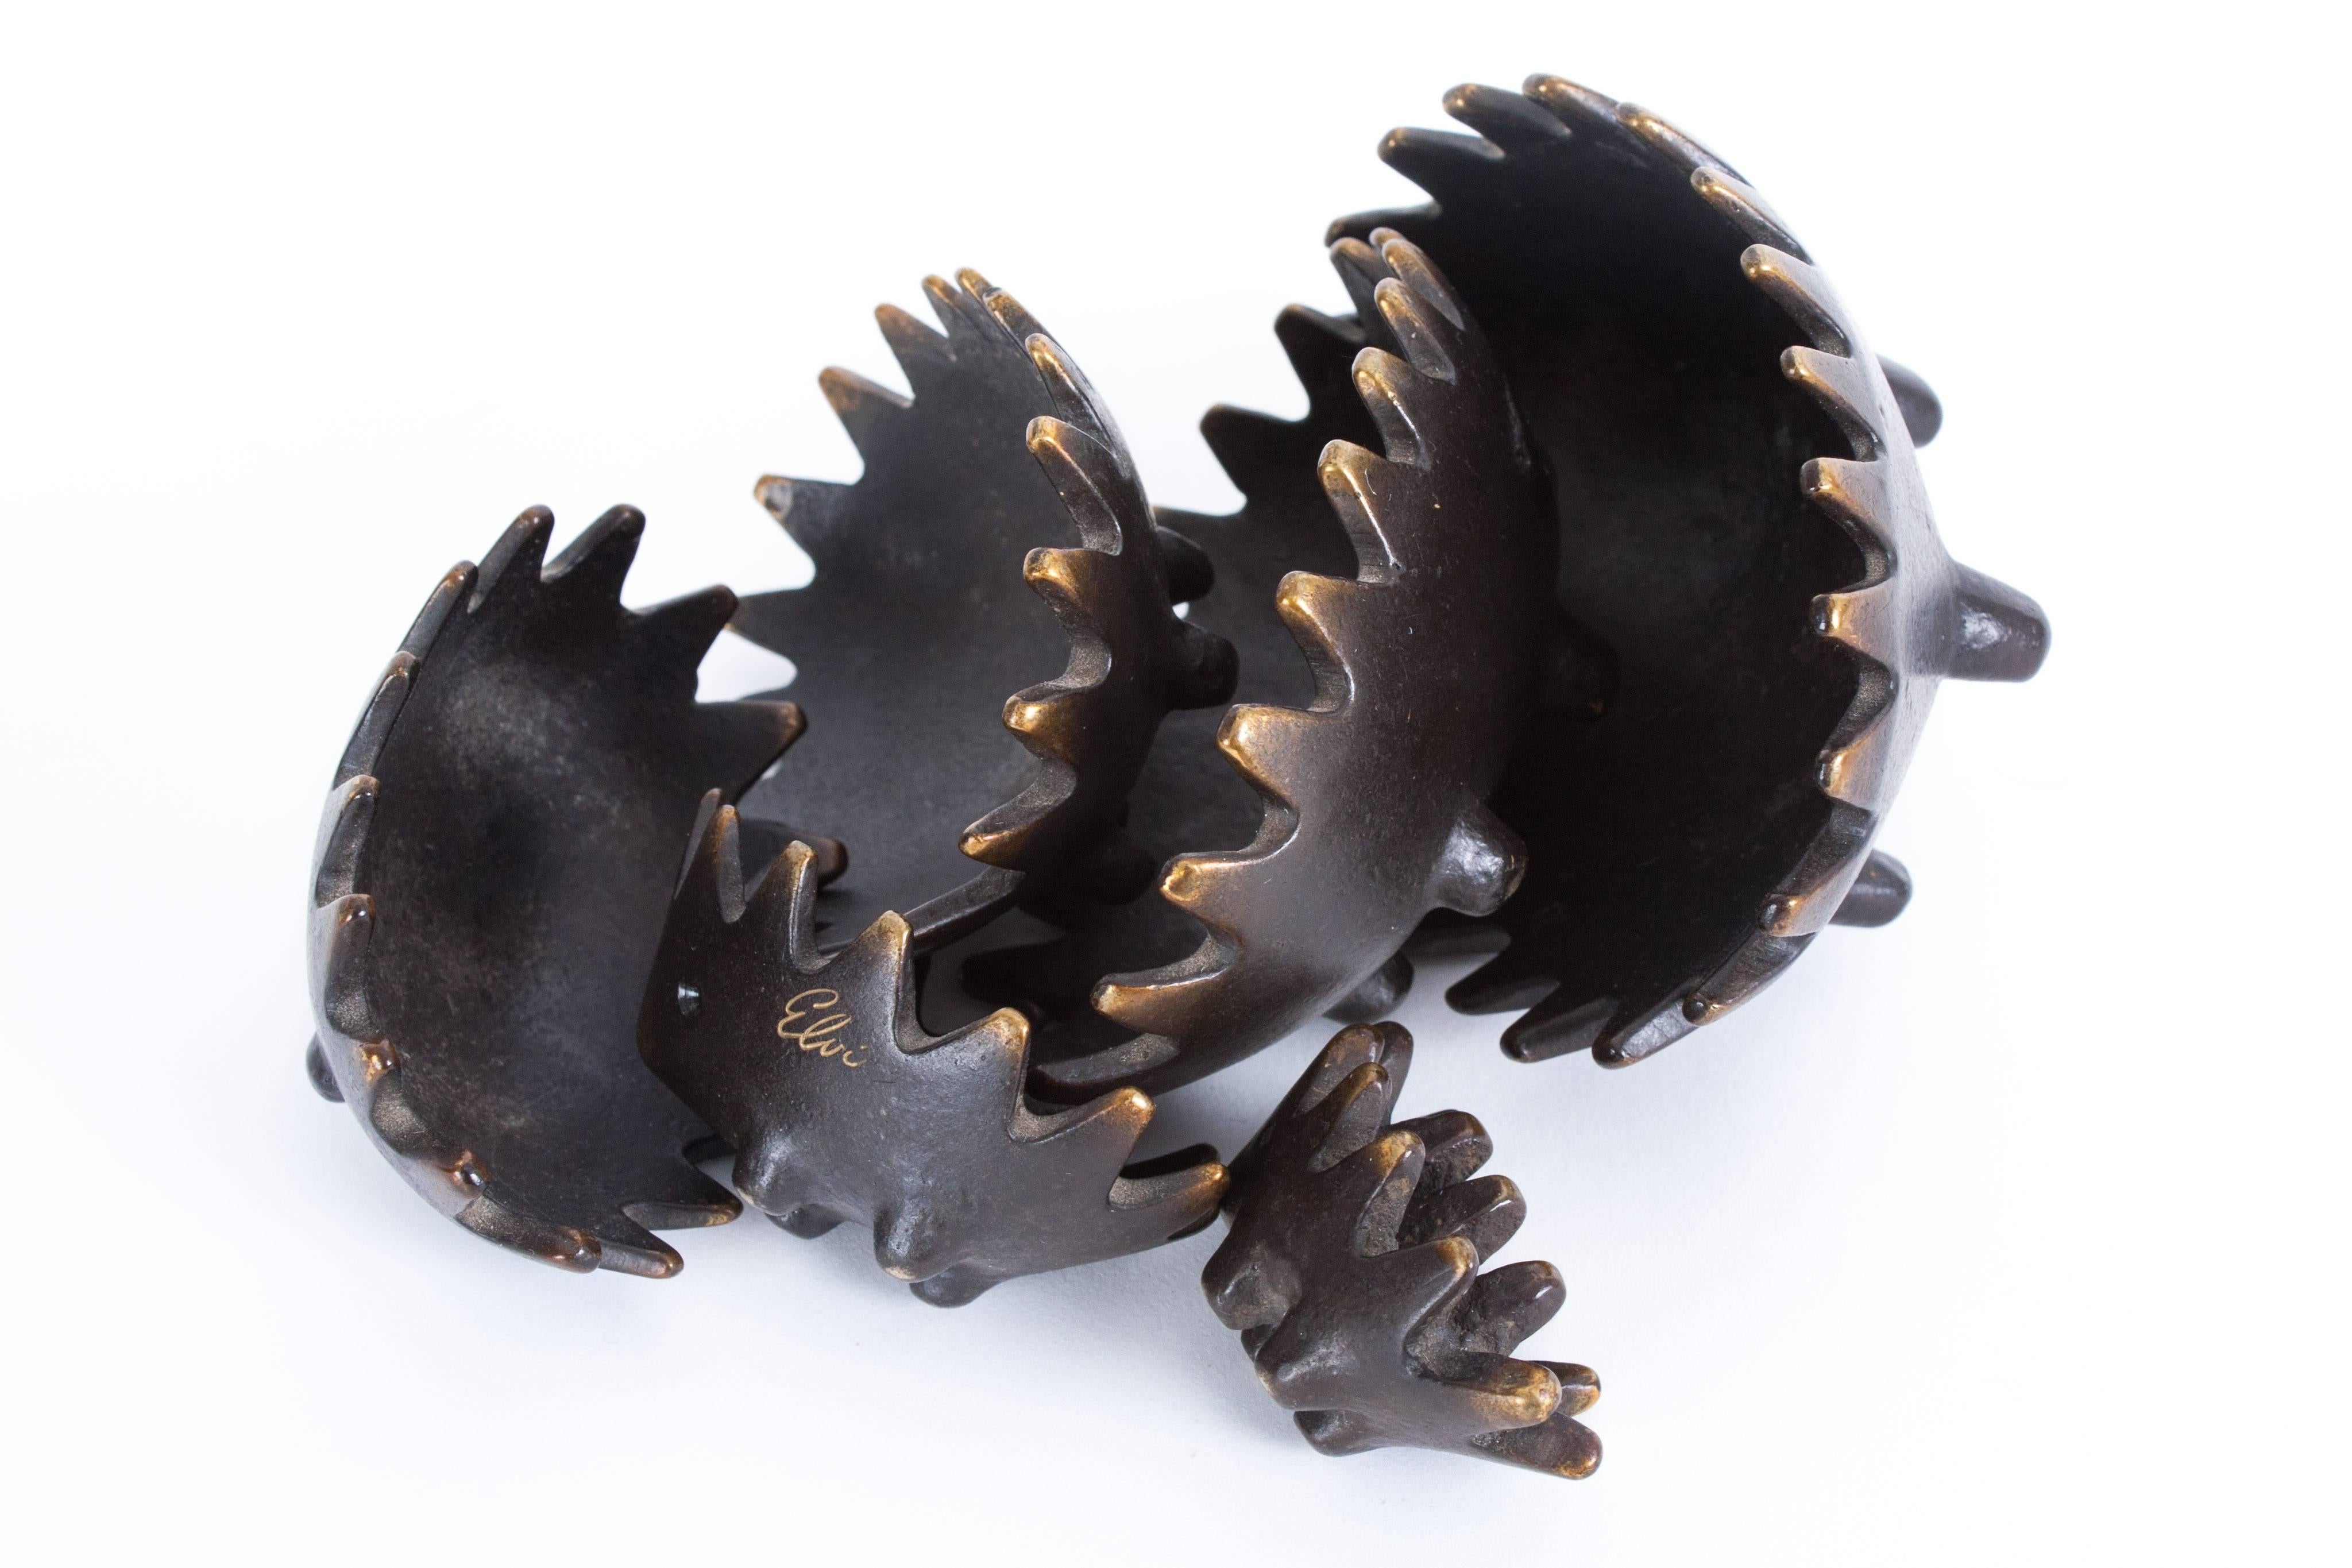 Hedgehog with her kids in bronze. The mother and kids has a very nice patina. Many years petted by hands. It is a havy set and nice to play with. The little did is very strong and thick. Originally made as a set of ashtrays! Signed with a name